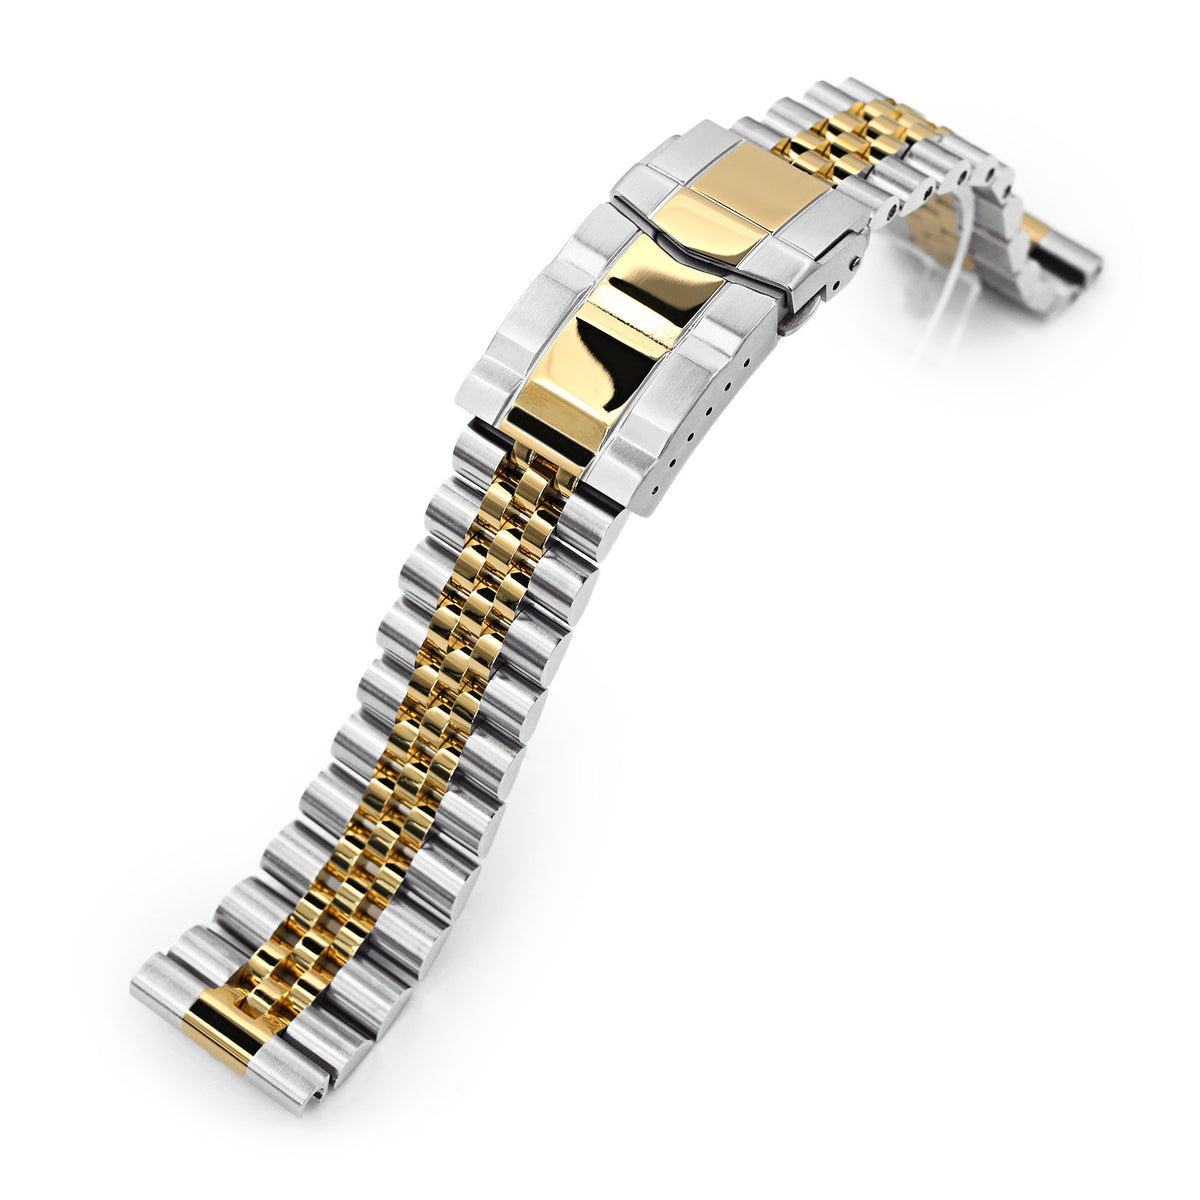 22mm Super-J Louis JUB 316L Stainless Steel Solid Straight End Watch Band, Two Tone IP Gold with 2T SUB Clasp Strapcode Watch Bands